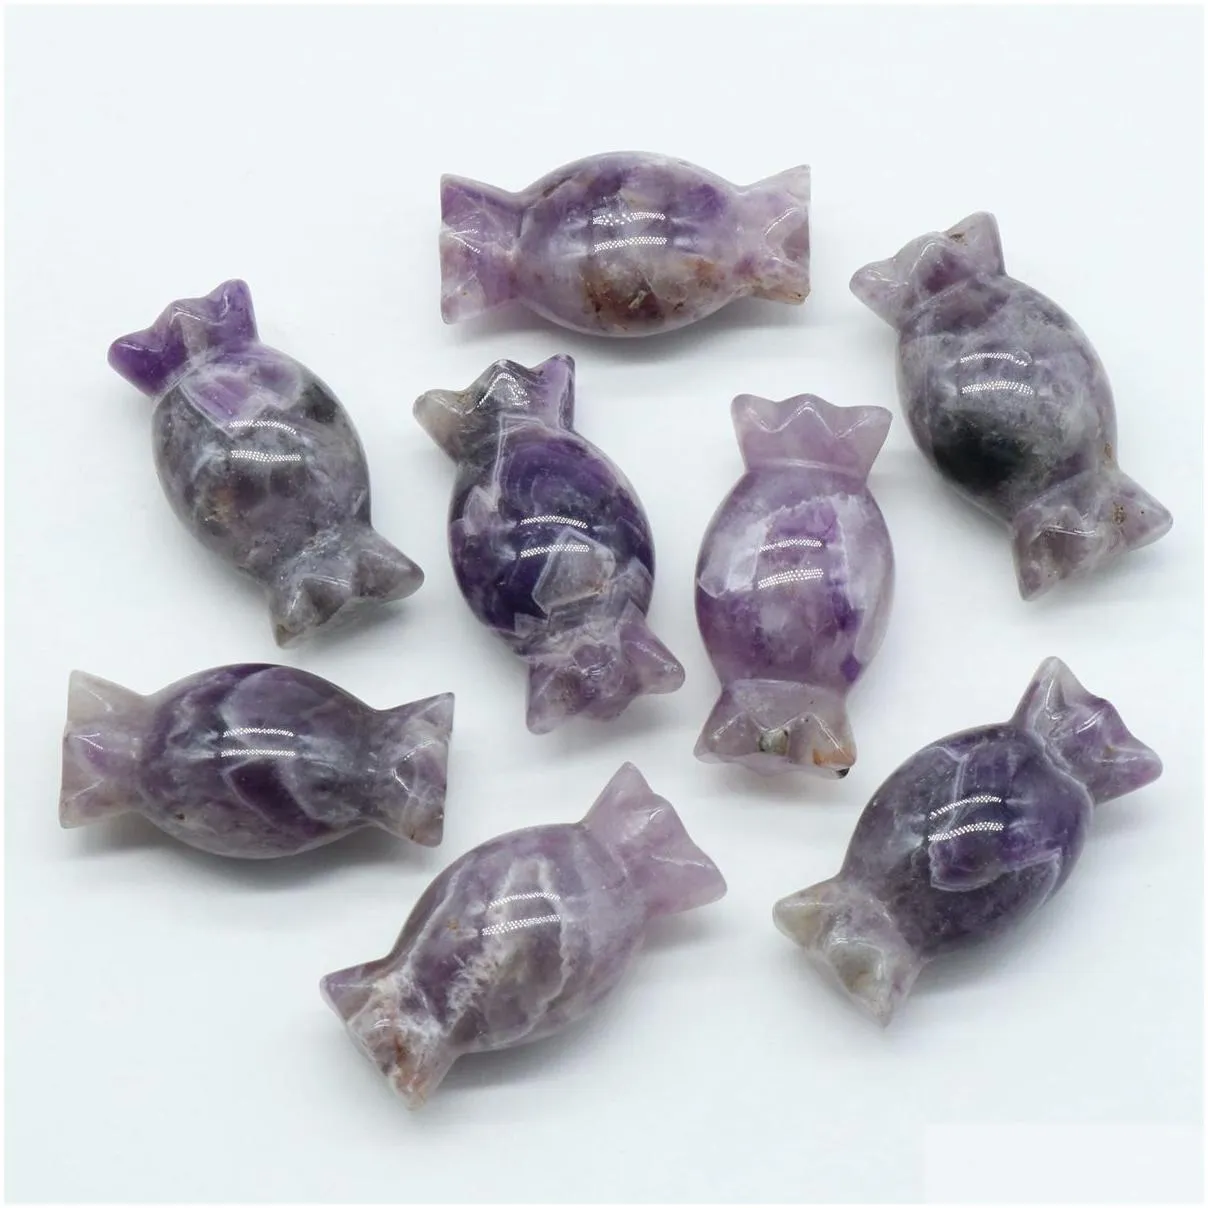 Natural Lepidolite Stone Carving Festival Candy Gift Gemstone Agate Ornaments Folk Arts Healing Energy For Decorate